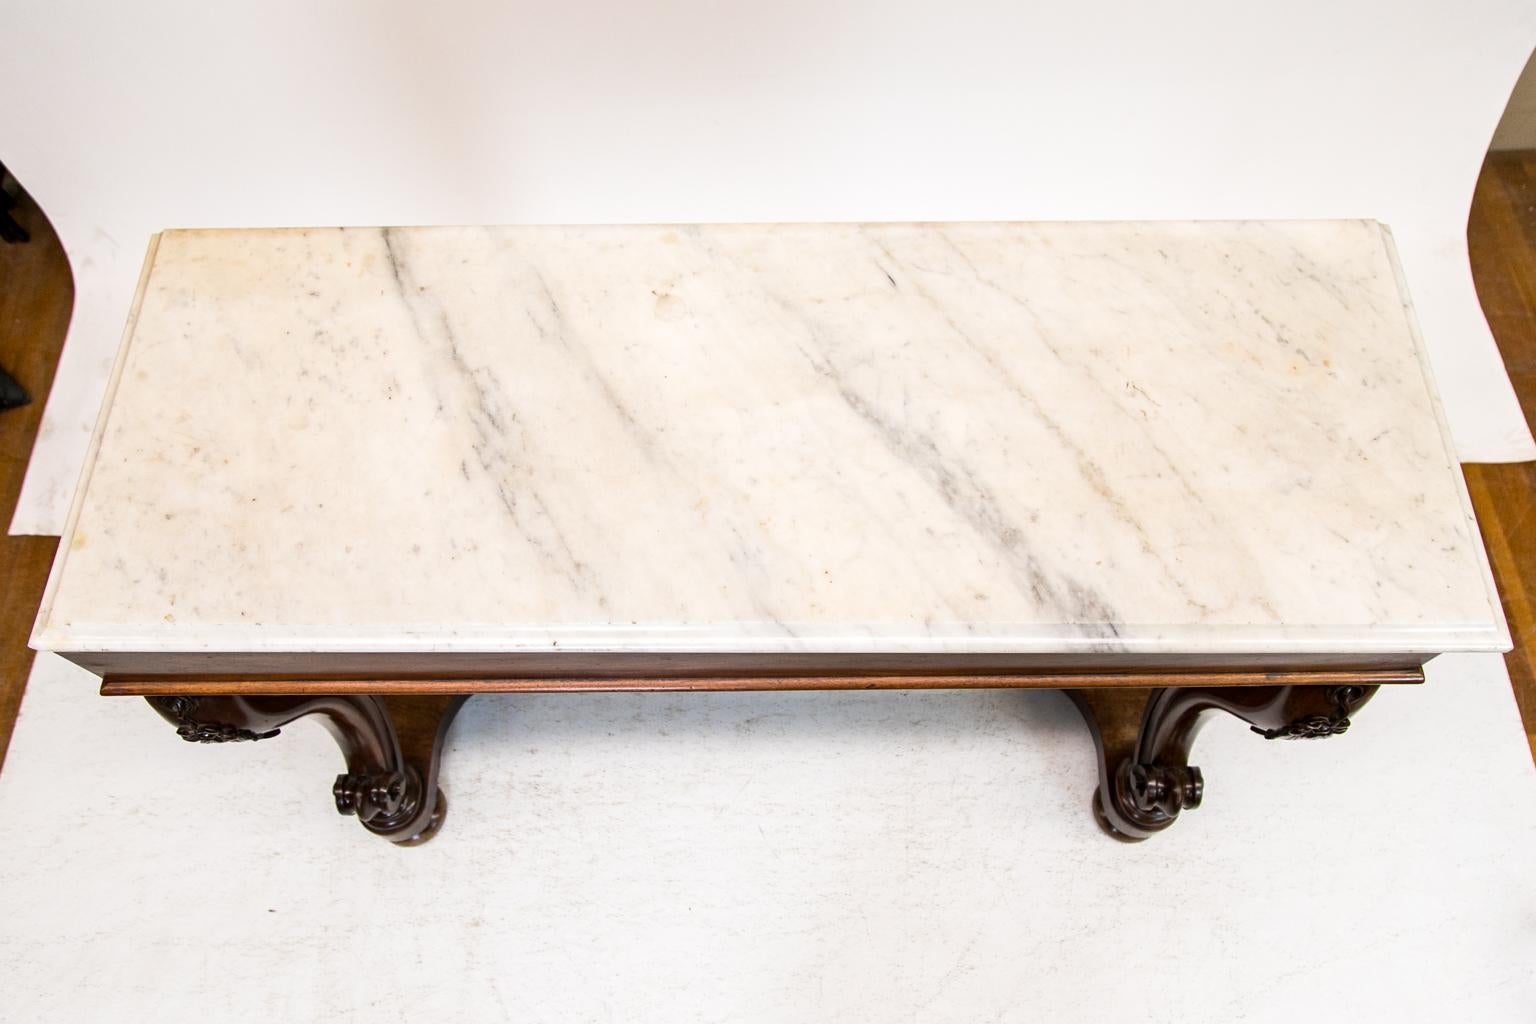 This Regency marble top console table has a Bianca Carrara marble top with an ogee edge. The shaped front legs have a carved floral motif and terminate in a volute scrolled foot that rests on a concave platform base.
  